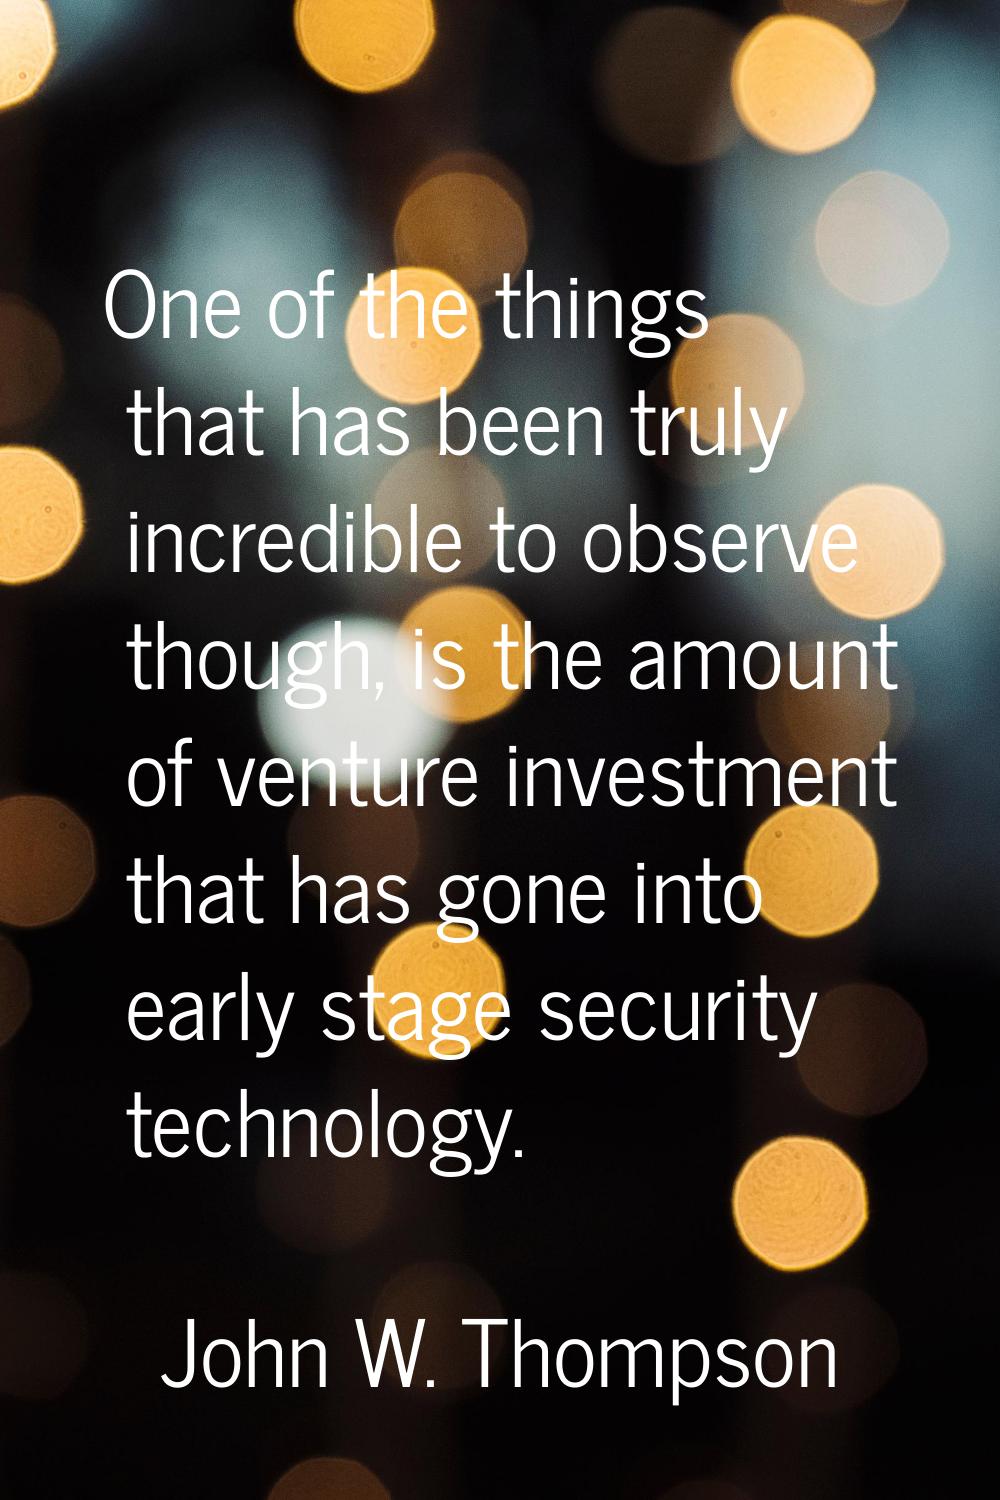 One of the things that has been truly incredible to observe though, is the amount of venture invest